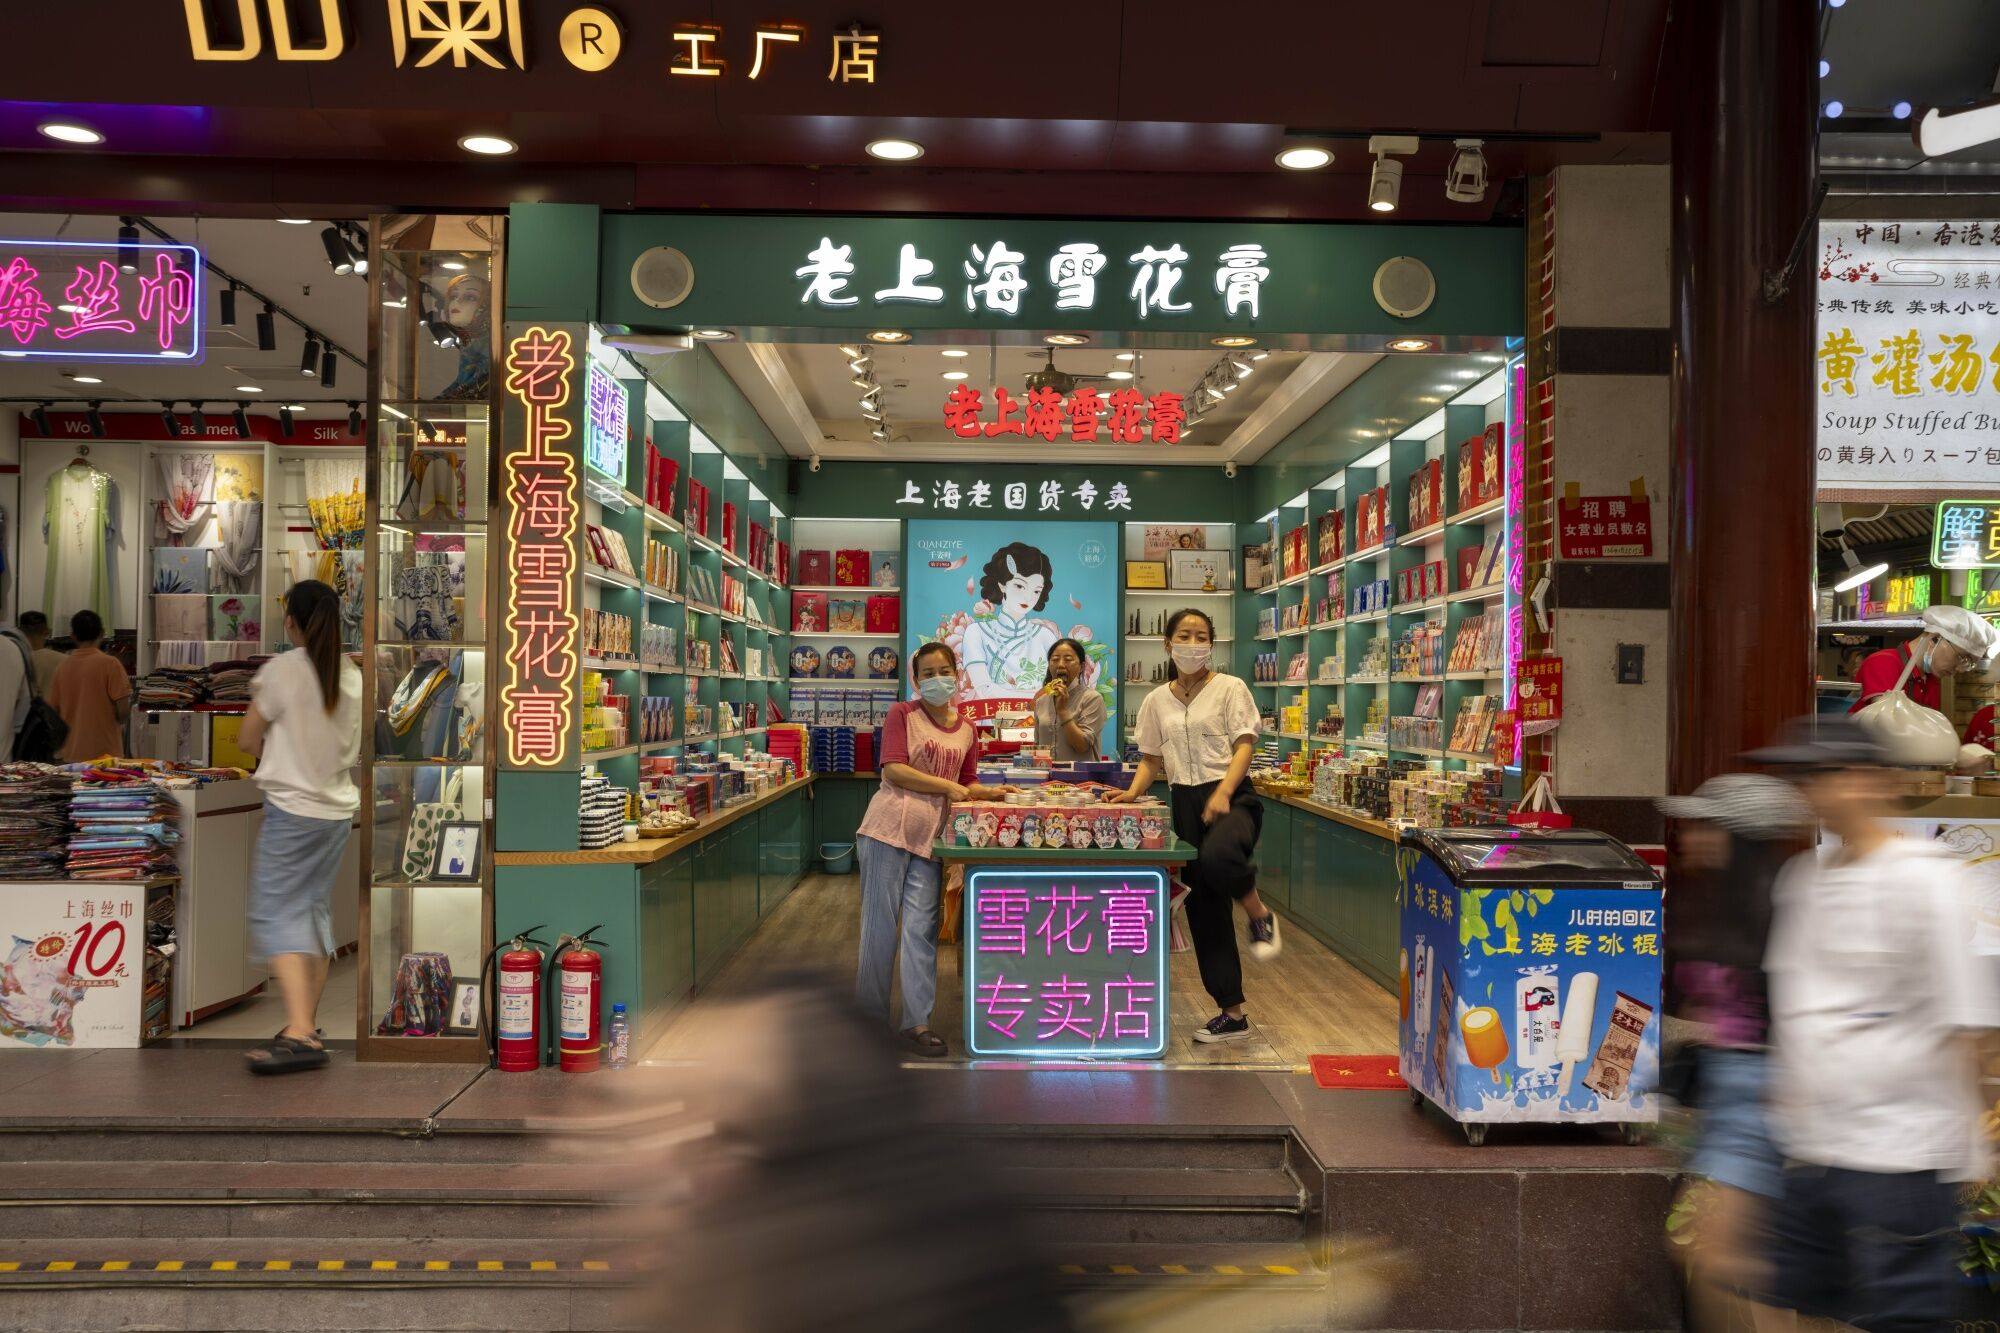 Vendors wait for customer at a store in Shanghai. Photo: Bloomberg